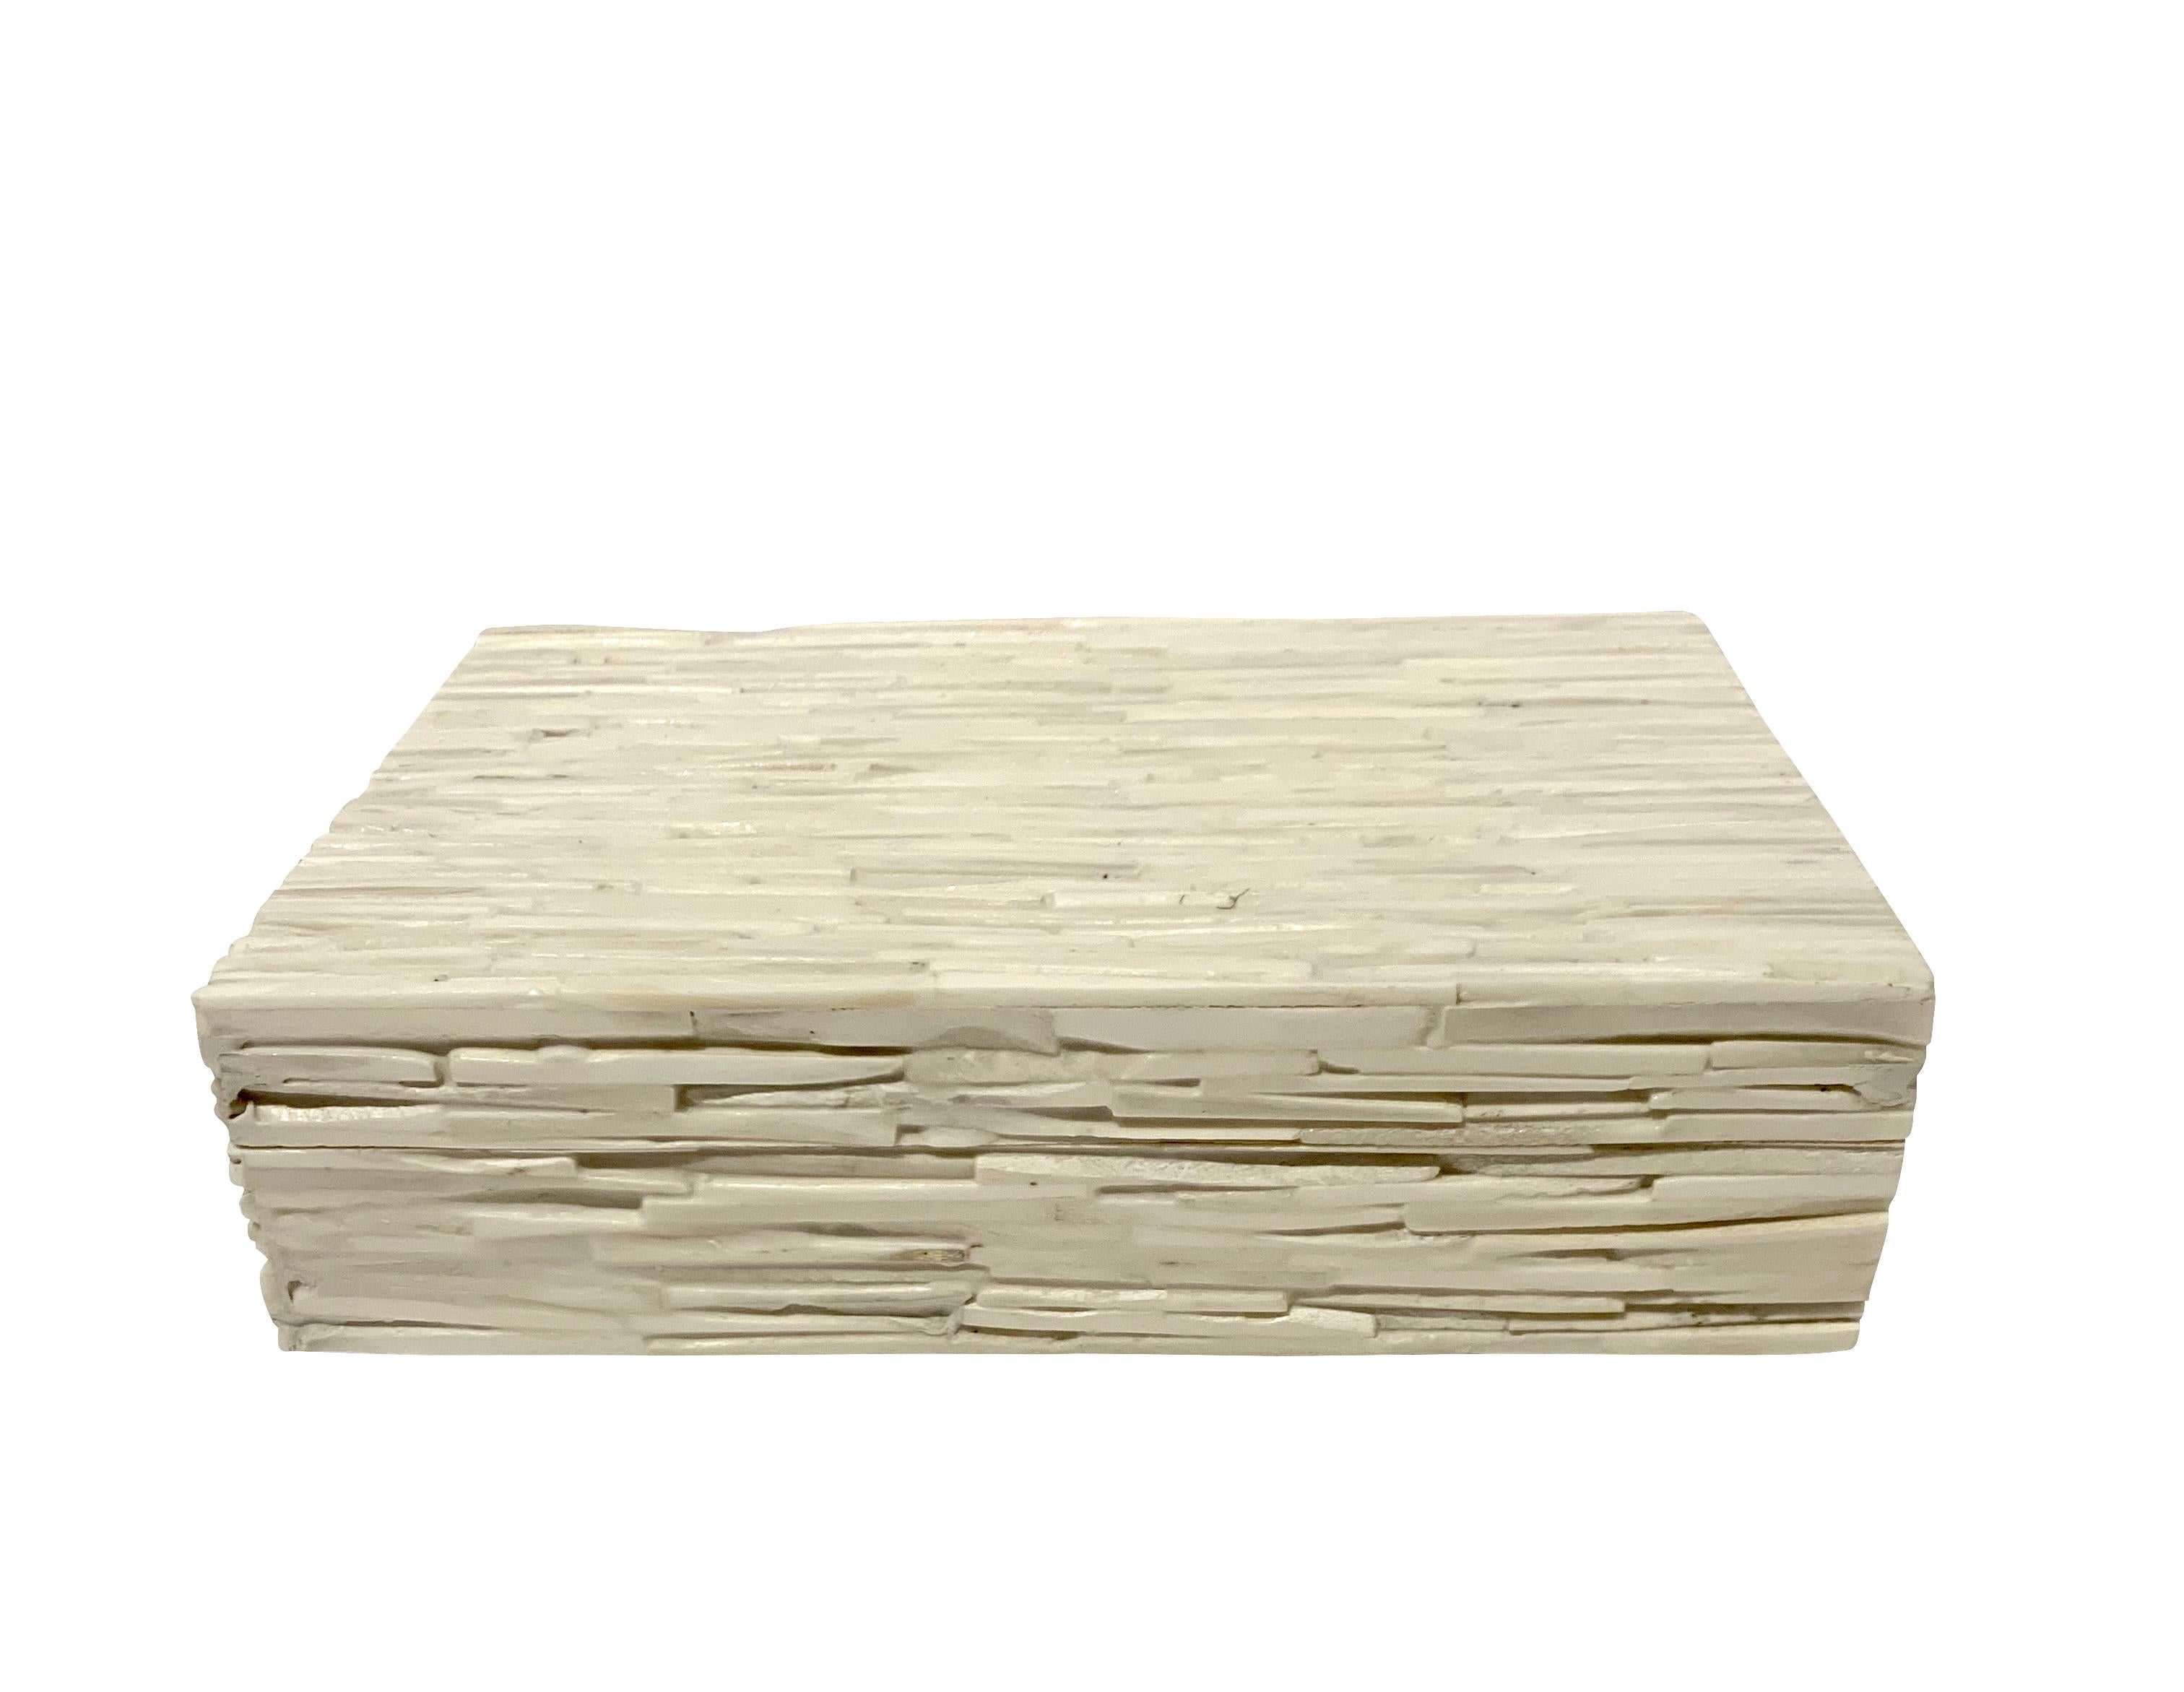 Contemporary Indian natural cream colored bone box.
Composed of a mosaic of slices of bone.
Also available in a larger size ( S6543 ).
Part of a large collection of bone boxes.